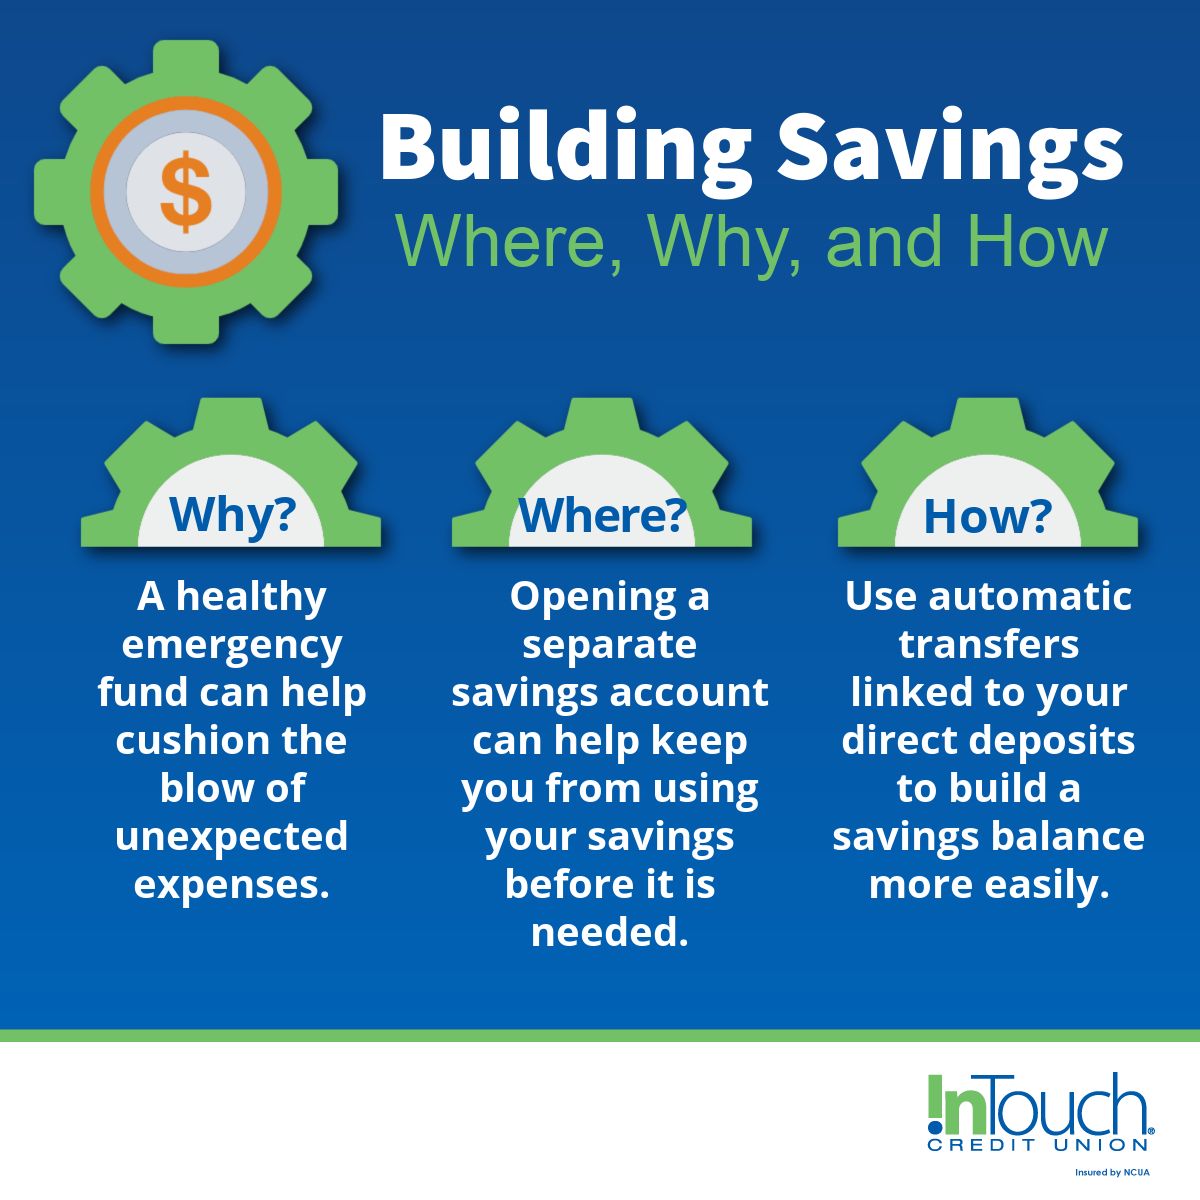 Building Savings. Why, cushion unexpected financial blows. Where, in a seprate savings account. How, using automatic transfers.